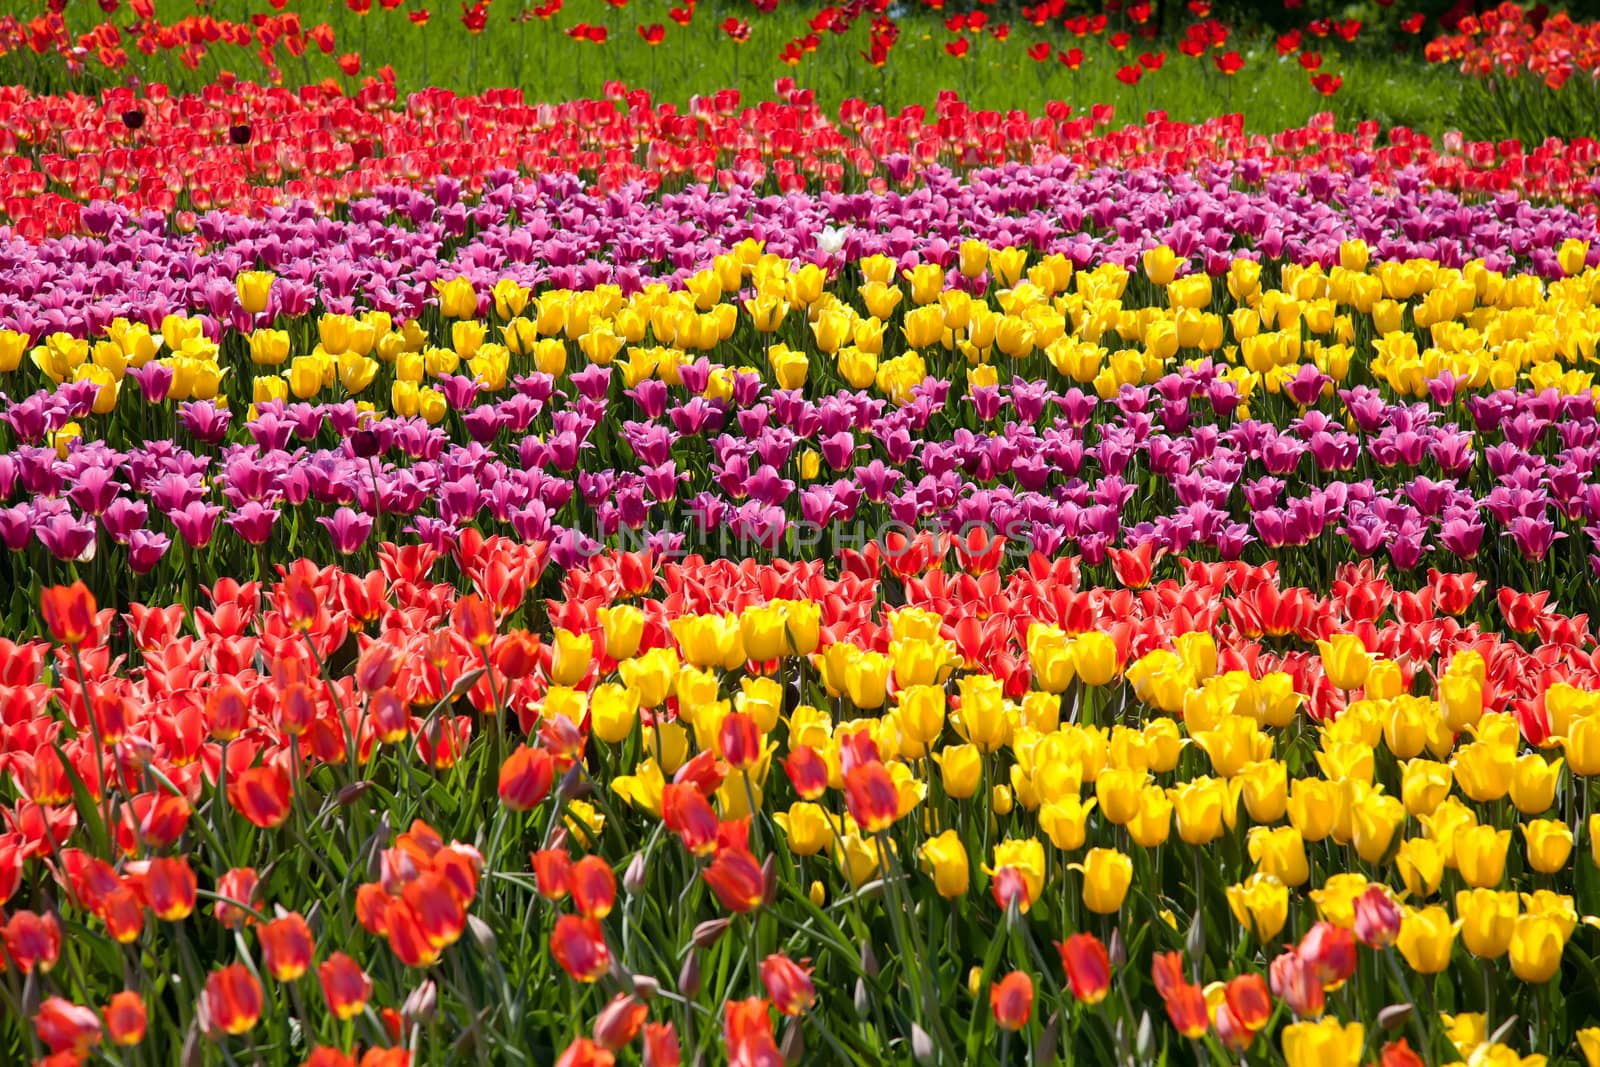 Stripes made with tulips by RawGroup